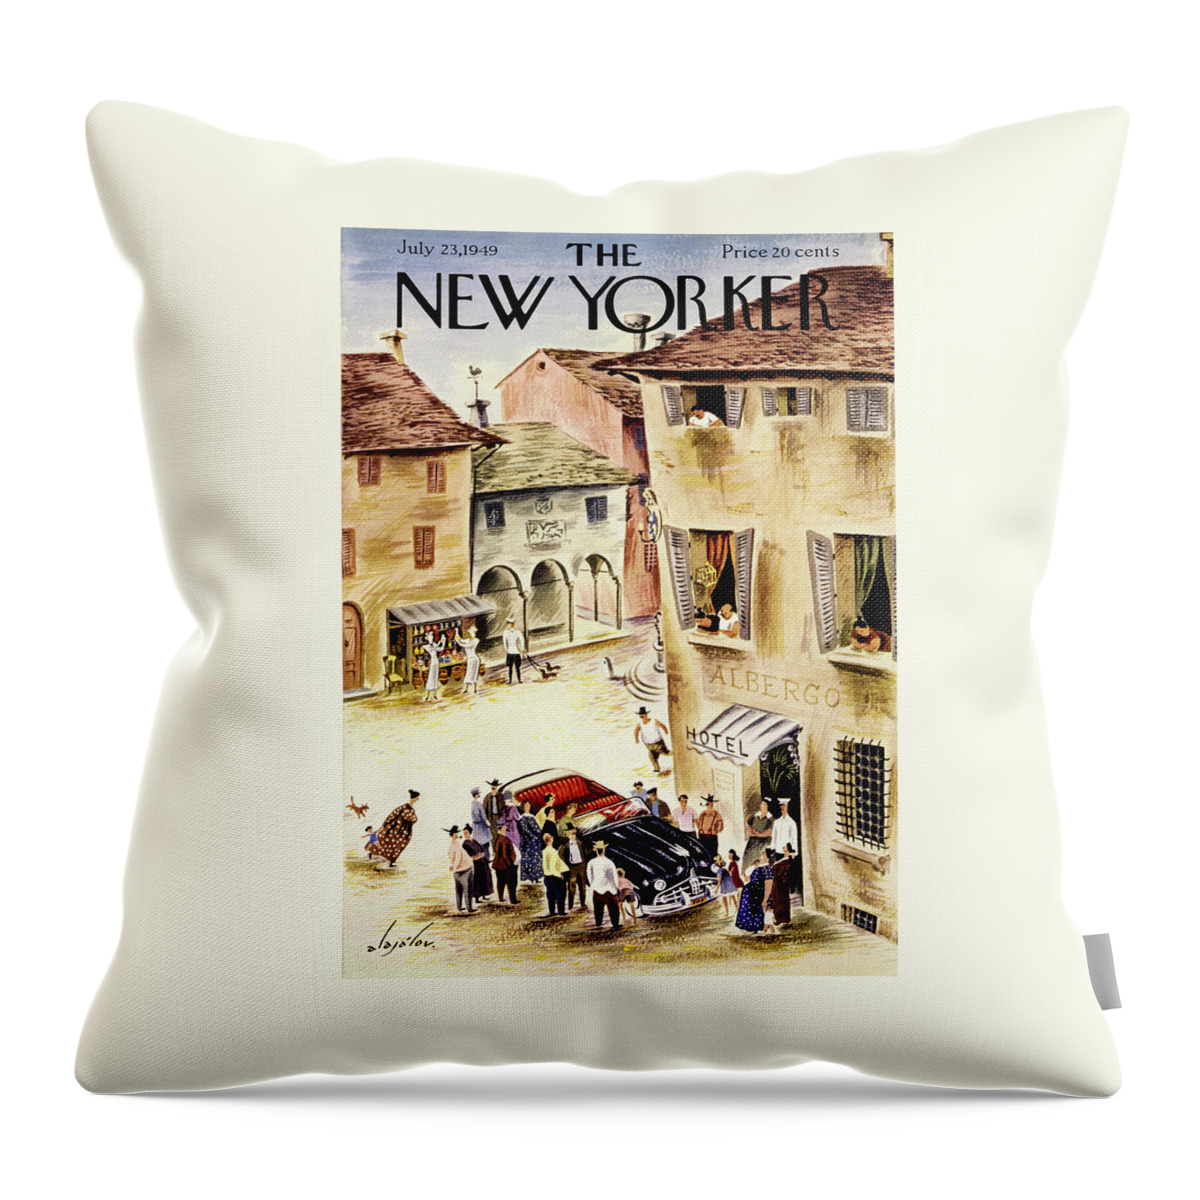 New Yorker July 23 1949 Throw Pillow